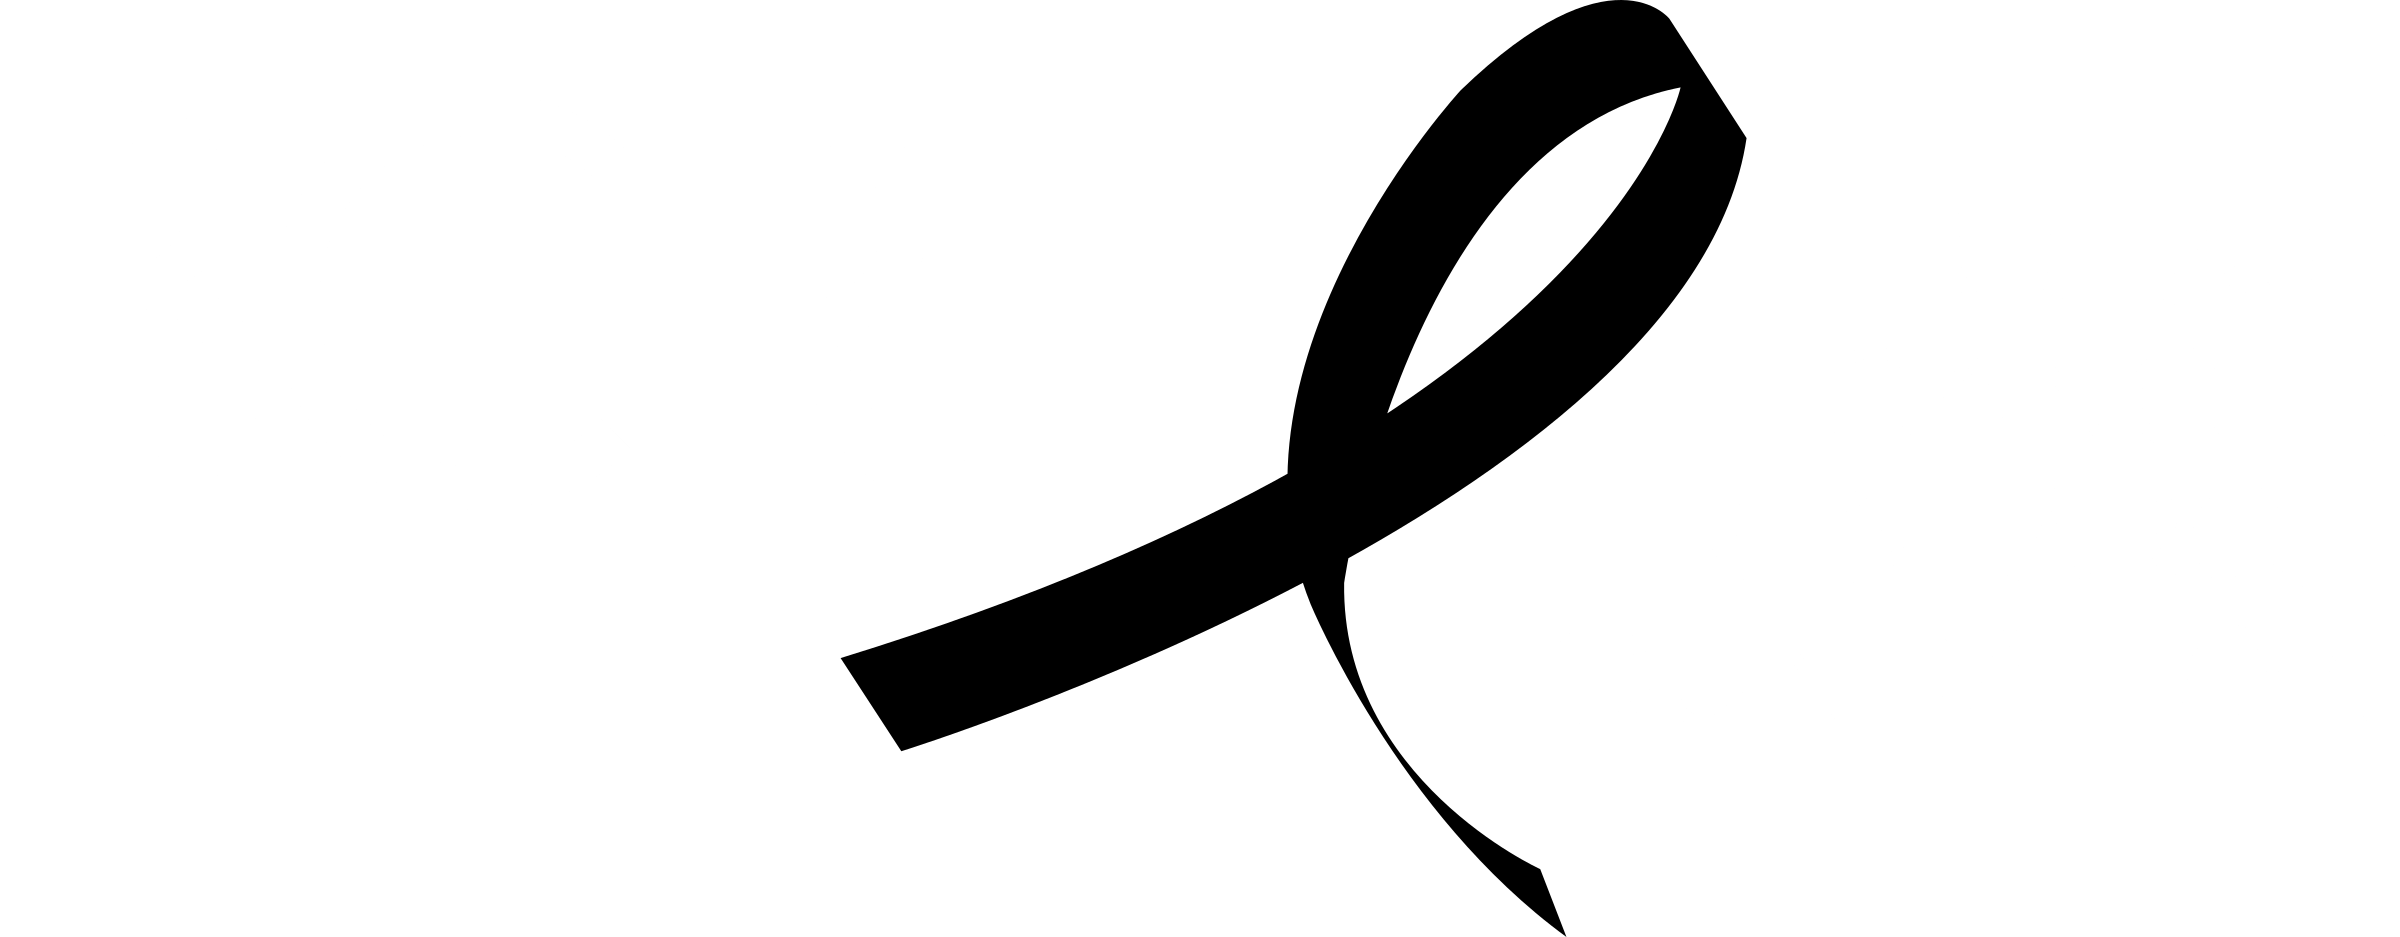 Research Foundation Logo Png.